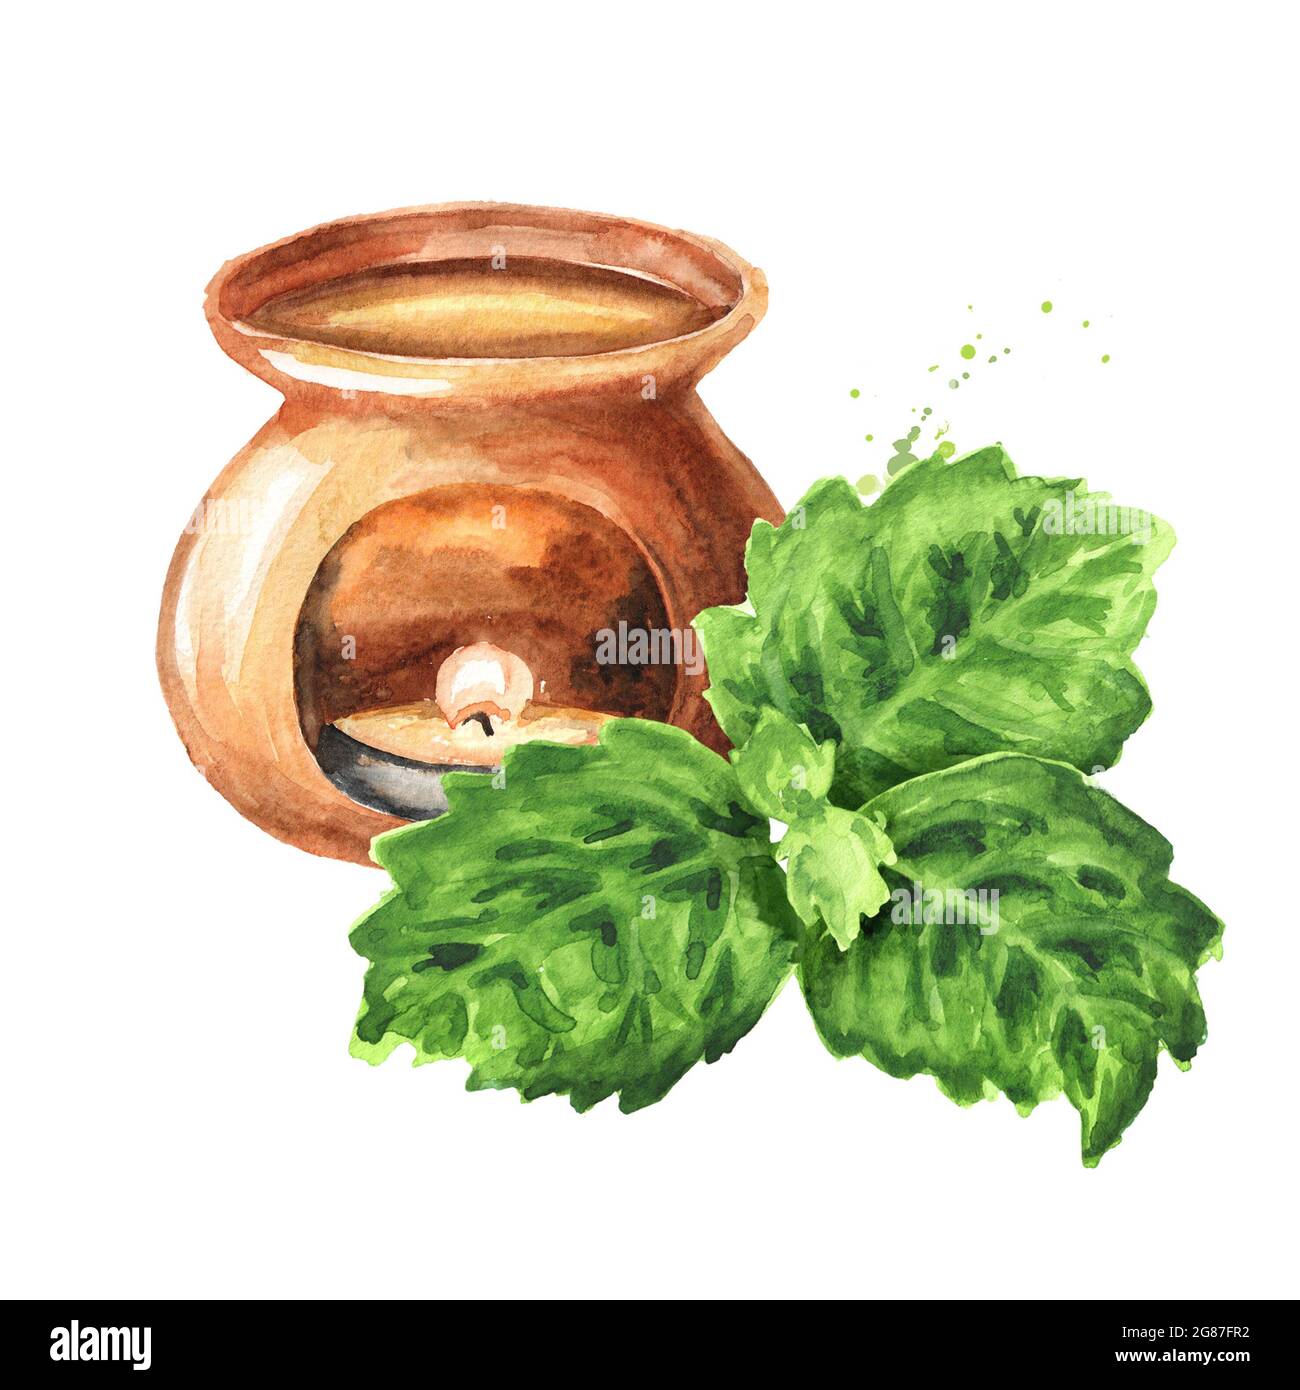 Aroma lamp and Plant patchouli or Pogostemon cablini branch with green leaves. Hand drawn watercolor illustration isolated on white background Stock Photo